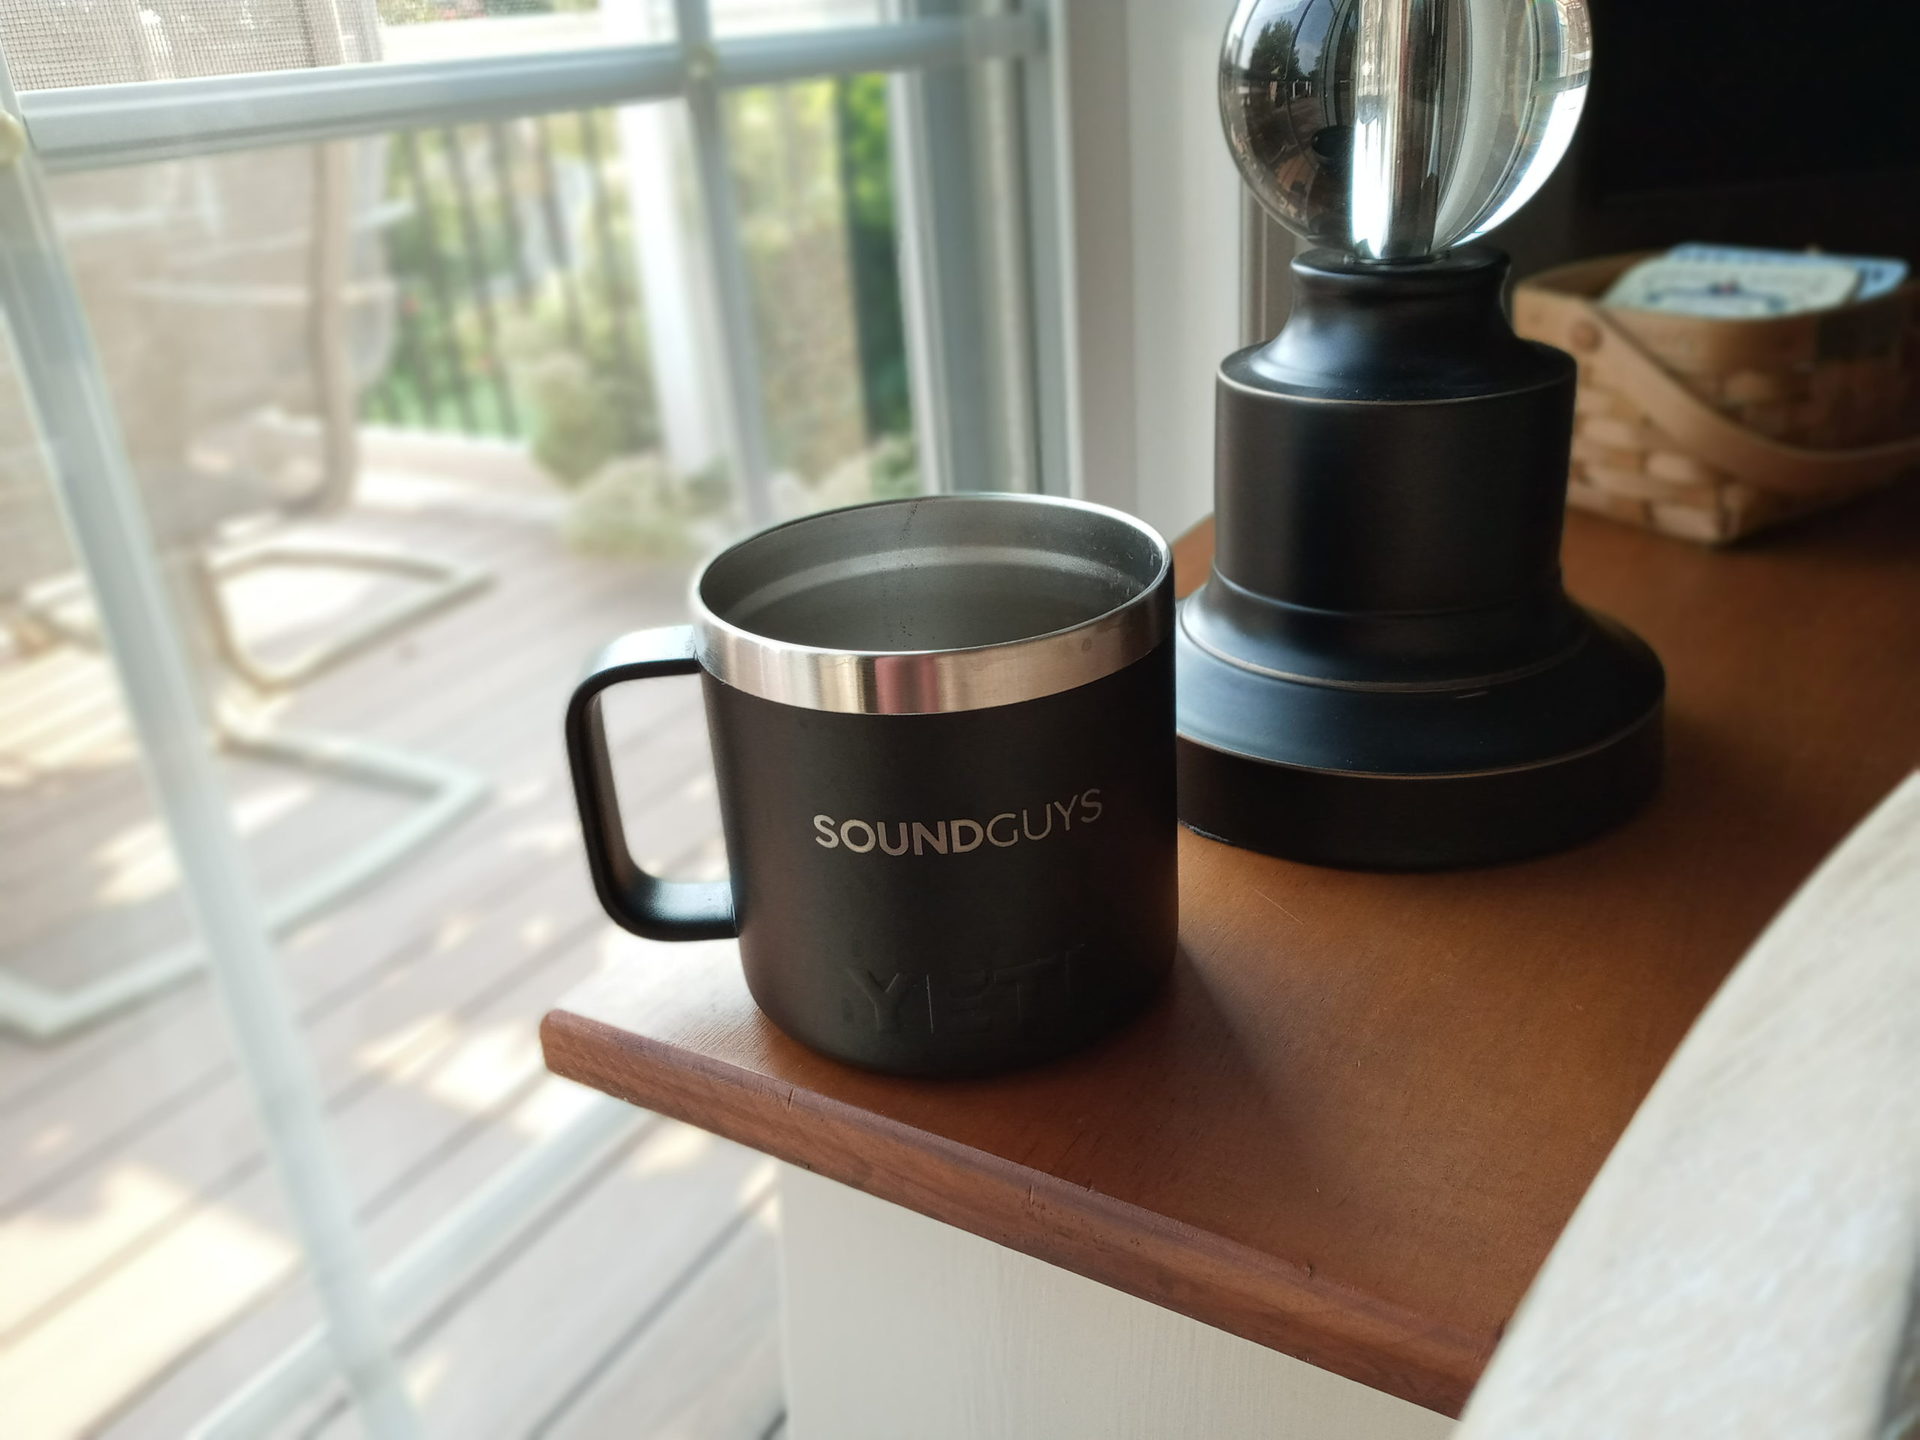 A portrait mode image of a mug taken with the LG Reflect